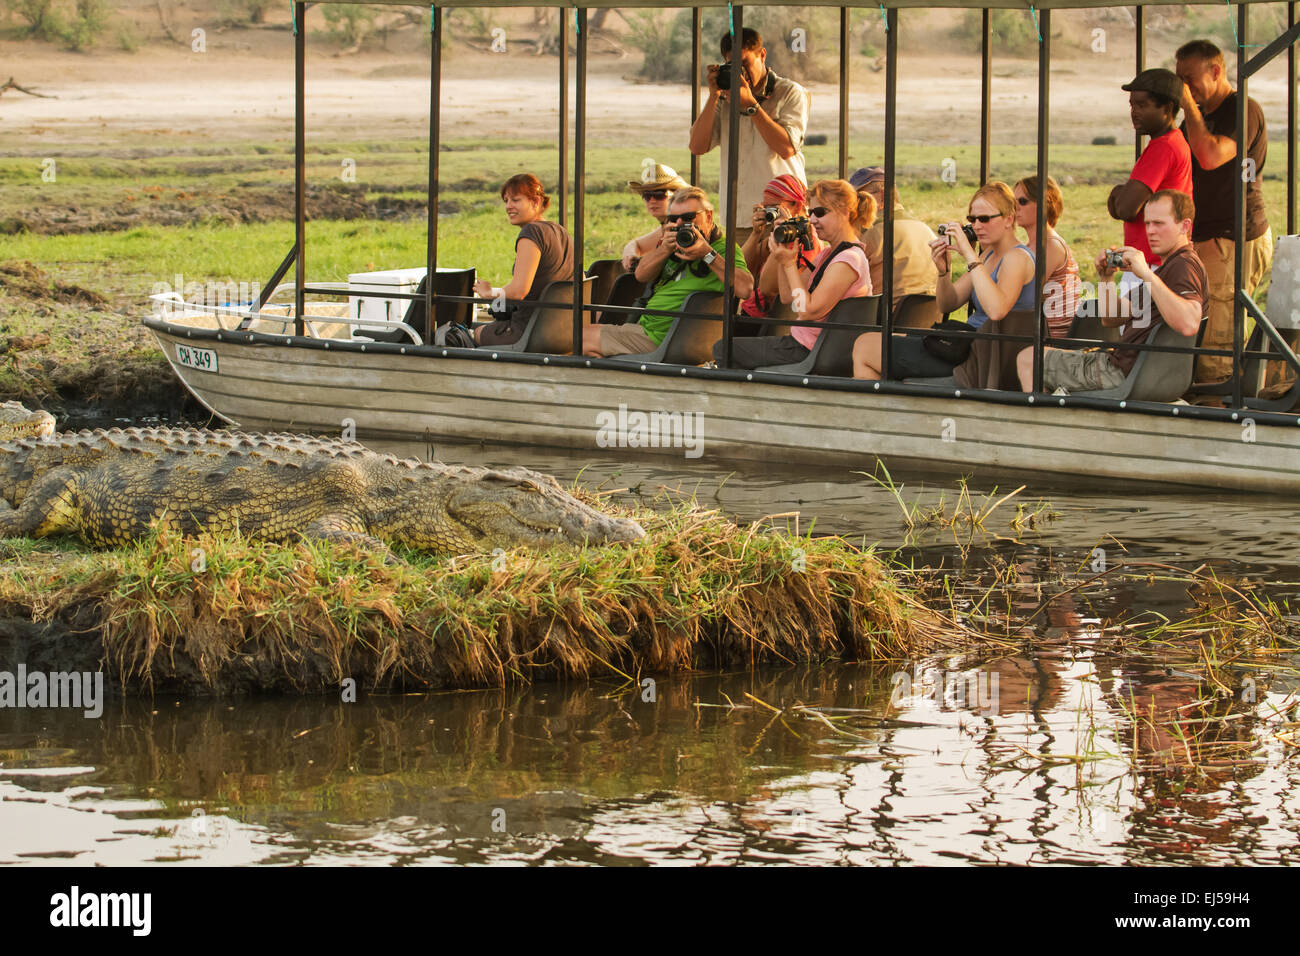 Tourist boat full of people watching and photographing a Nile Crocodile in the Chobe river in Botswana, Africa Stock Photo